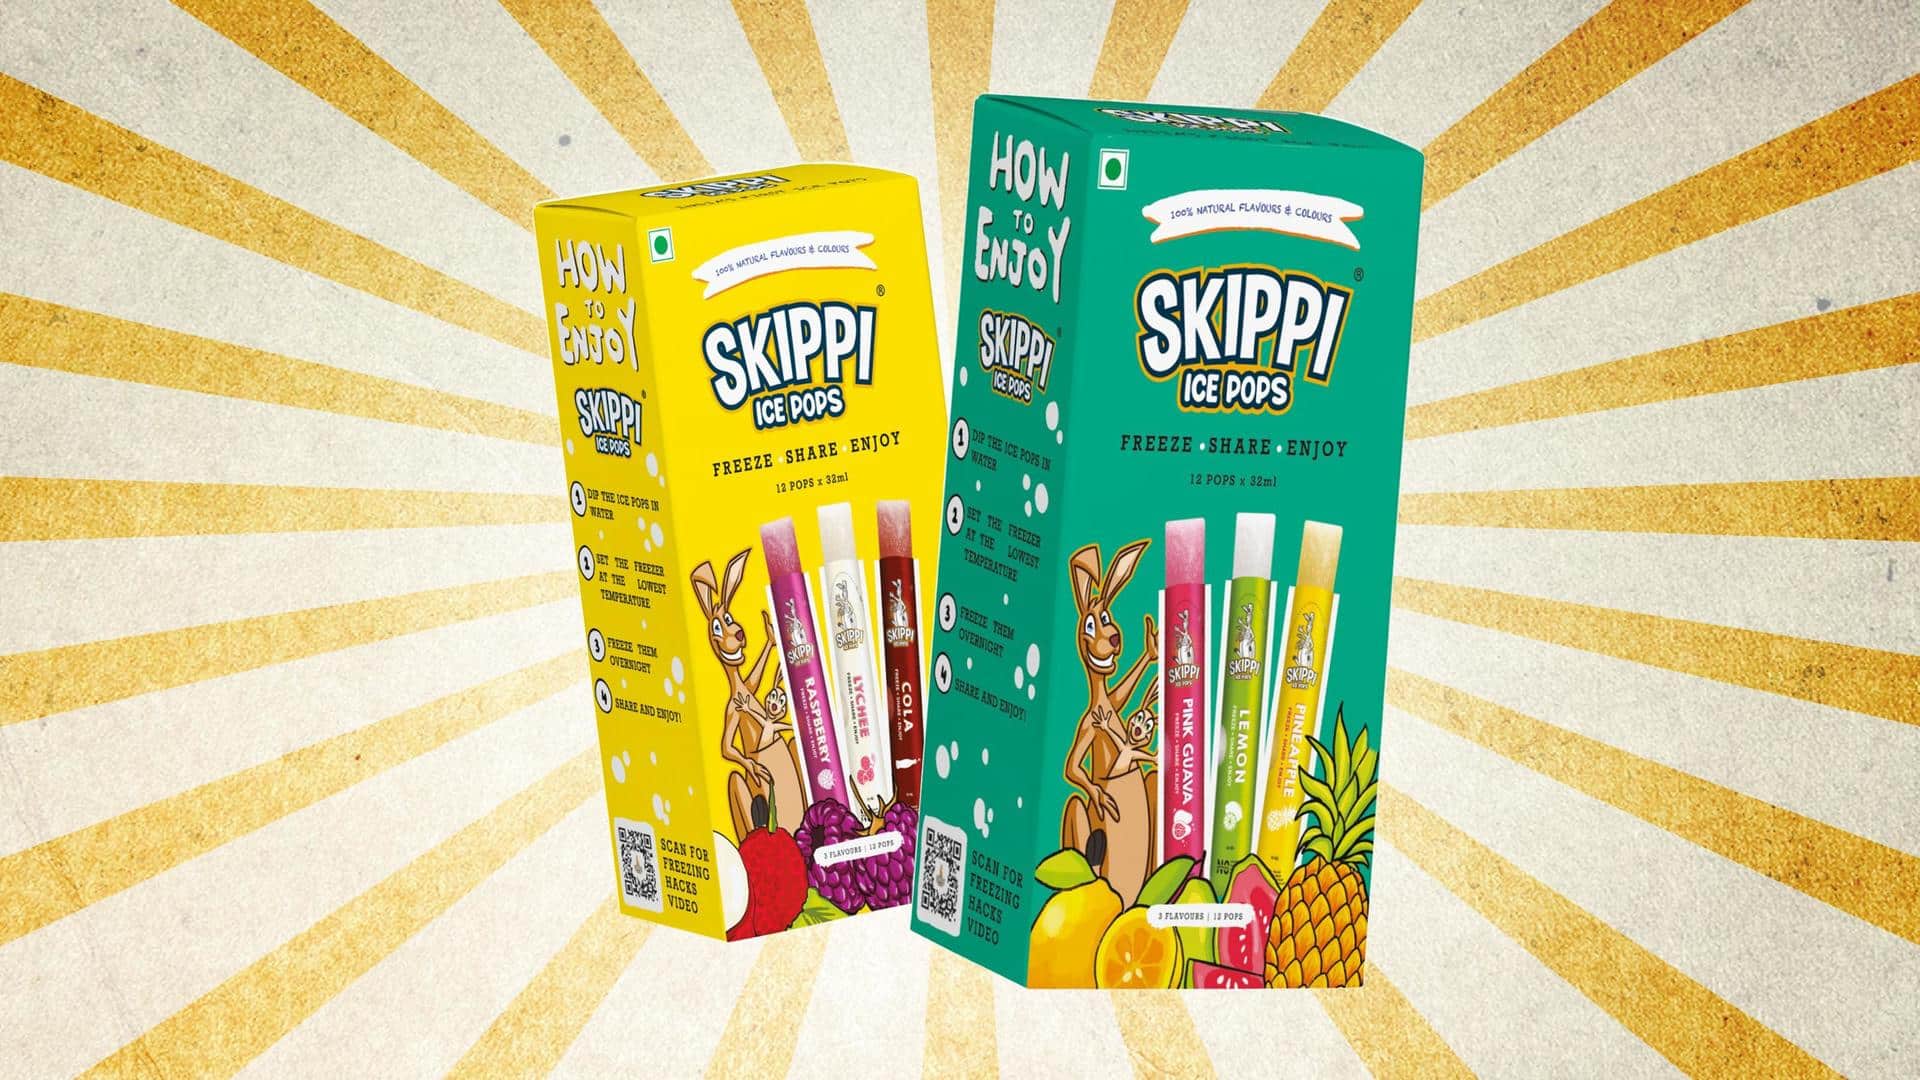 Product review: Revisiting childhood with Skippi ice pops